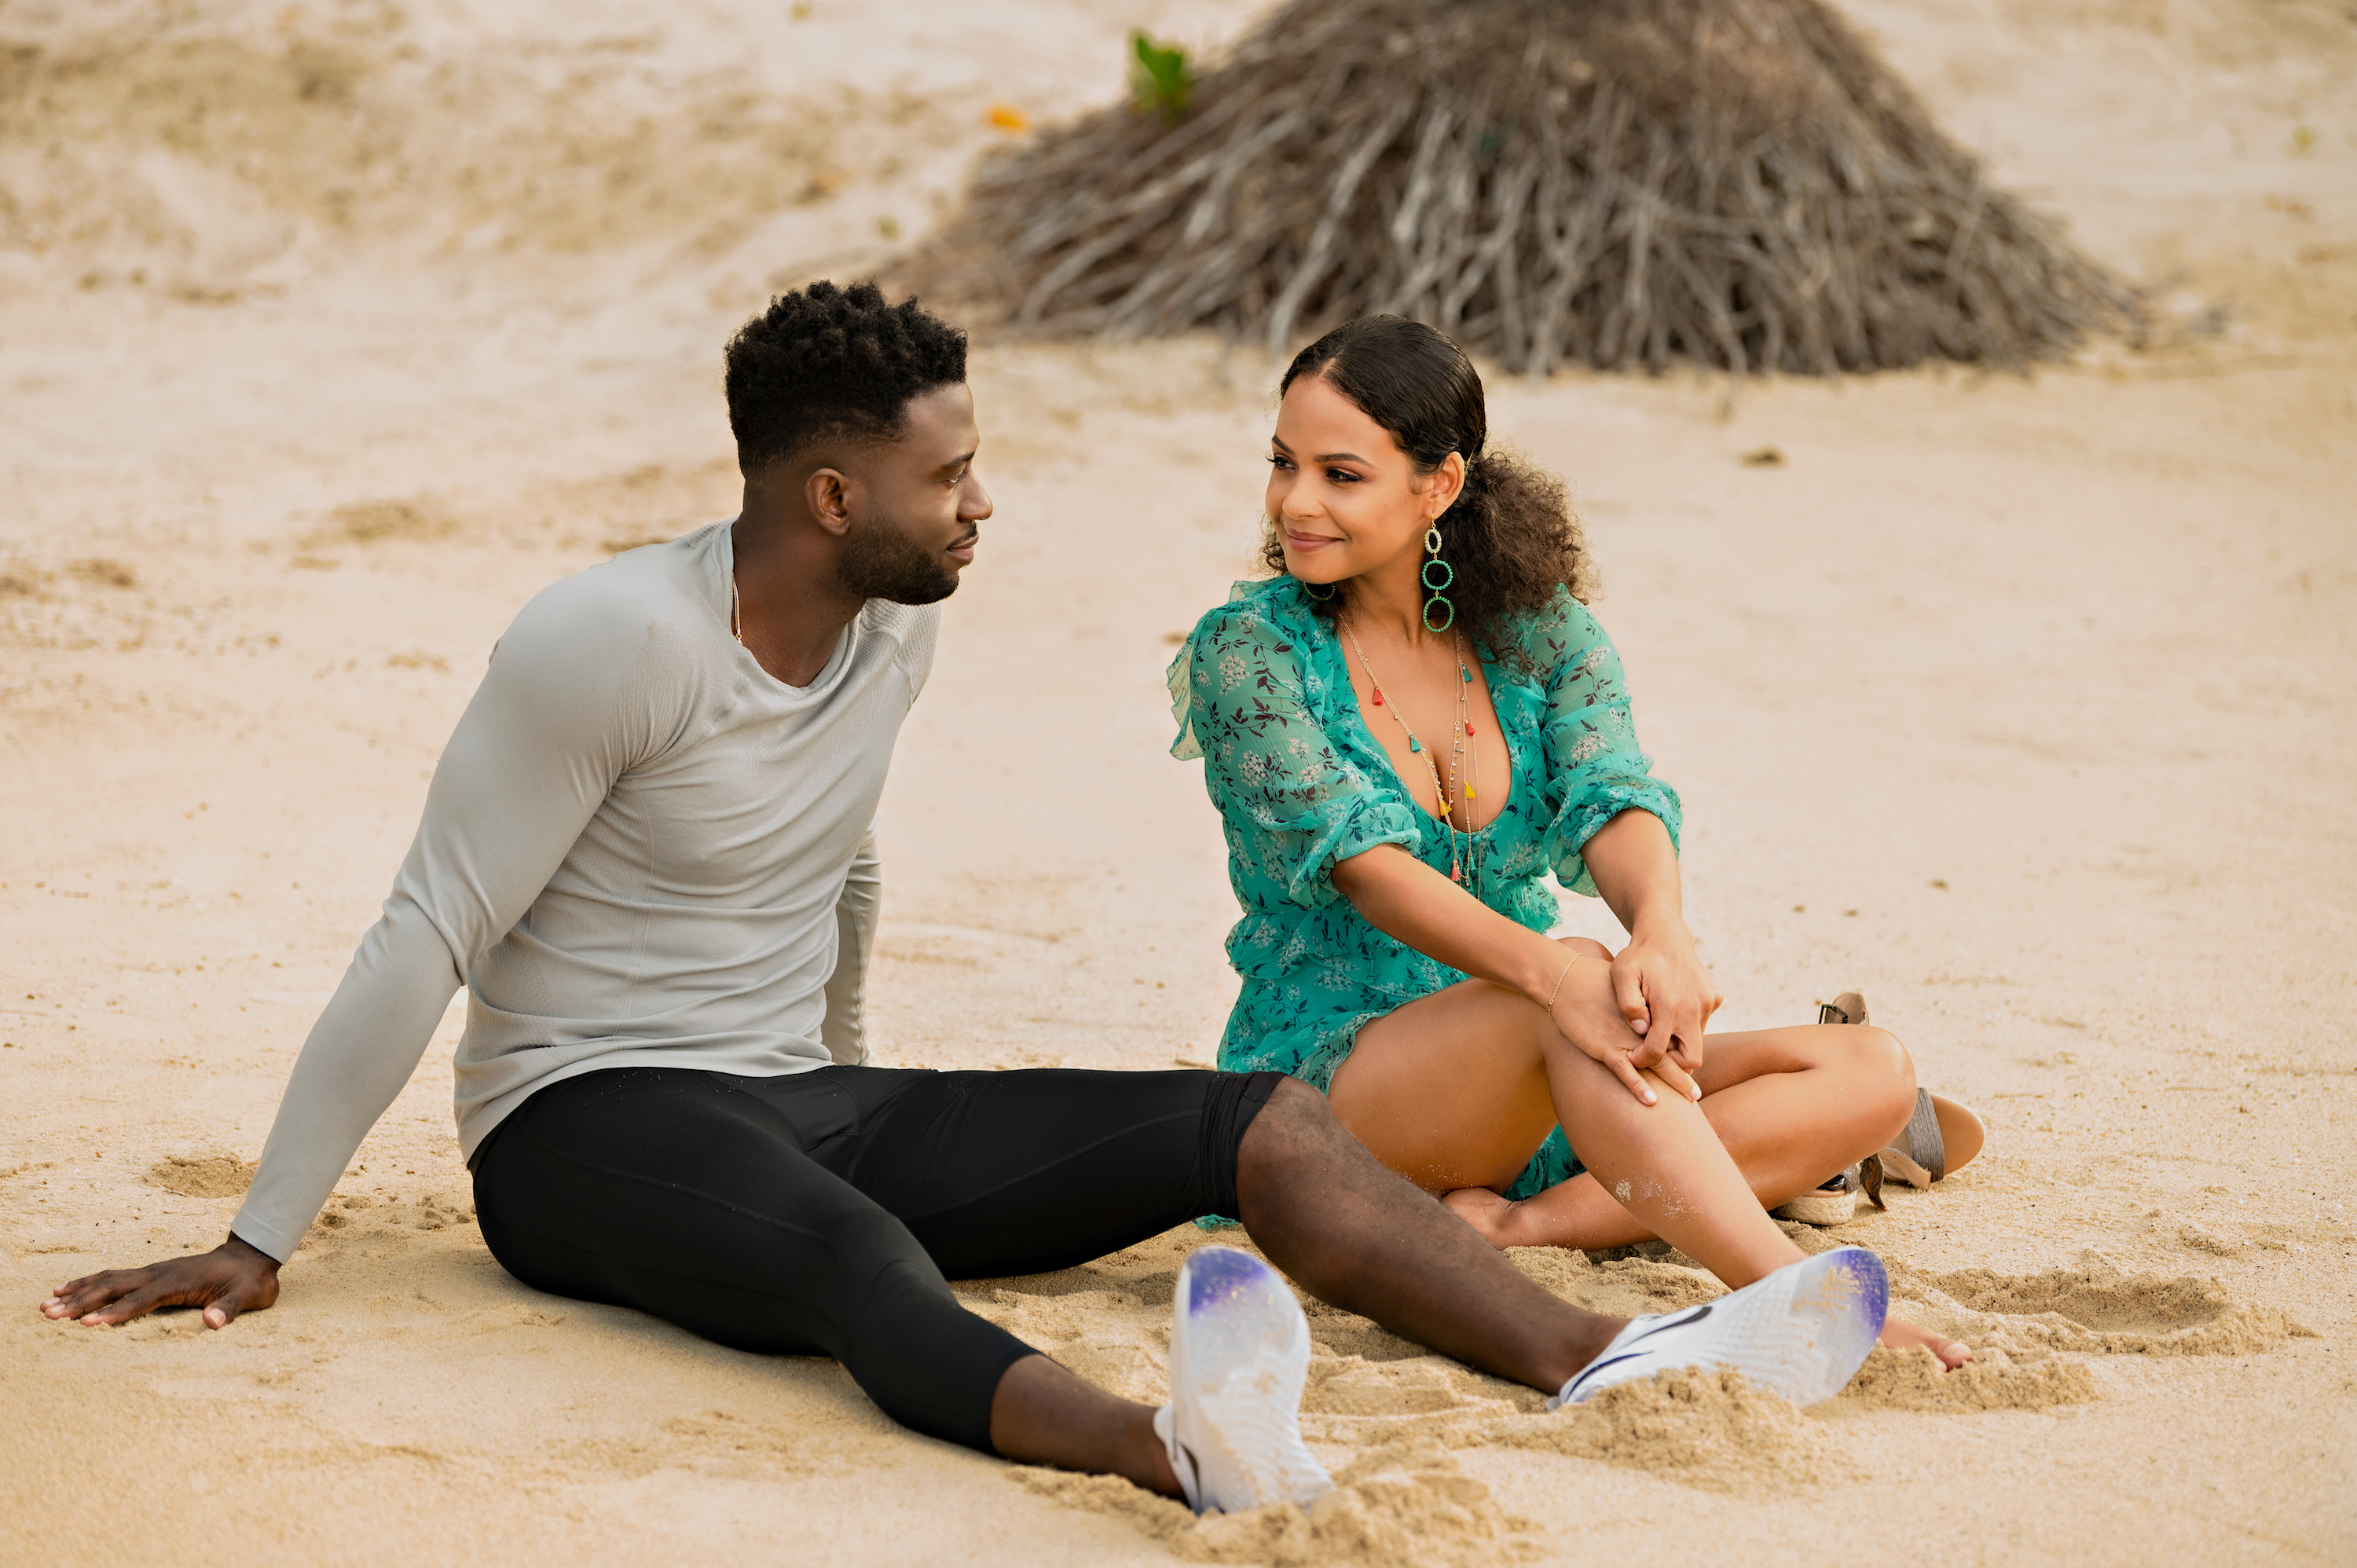 Exclusive: Christina Milian On Moving Past Heartbreak To Find Love In Paradise In Netflix's 'Resort To Love'